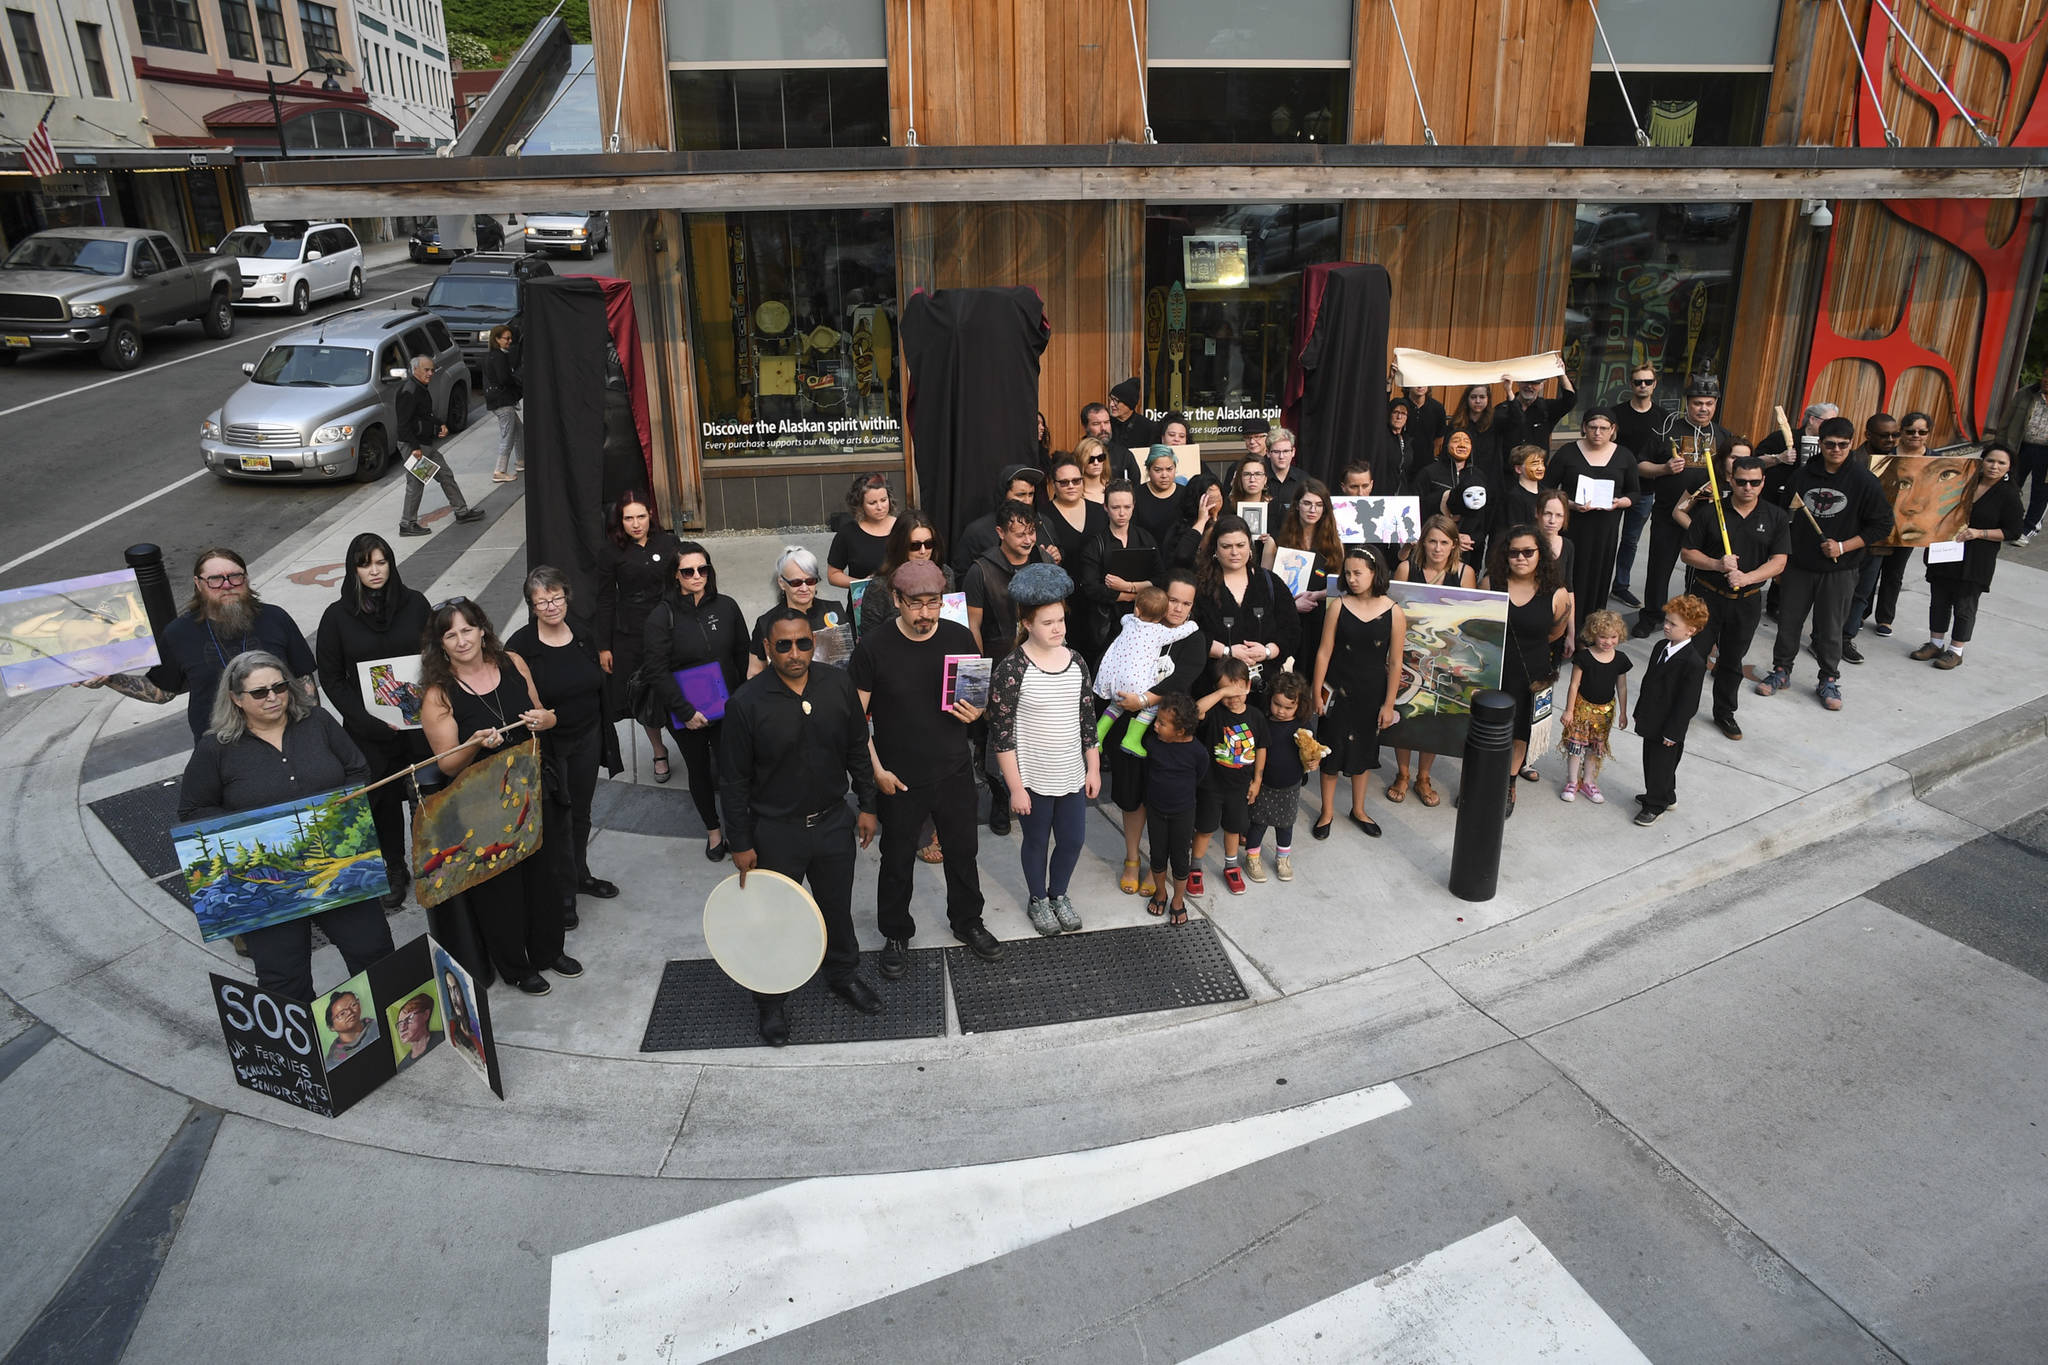 About 50 artists stand with their work in front of the Sealaska Heritage Institute on Tuesday, July 9, 2019, to protest heavy cuts to state arts programs. (Michael Penn | Juneau Empire File)